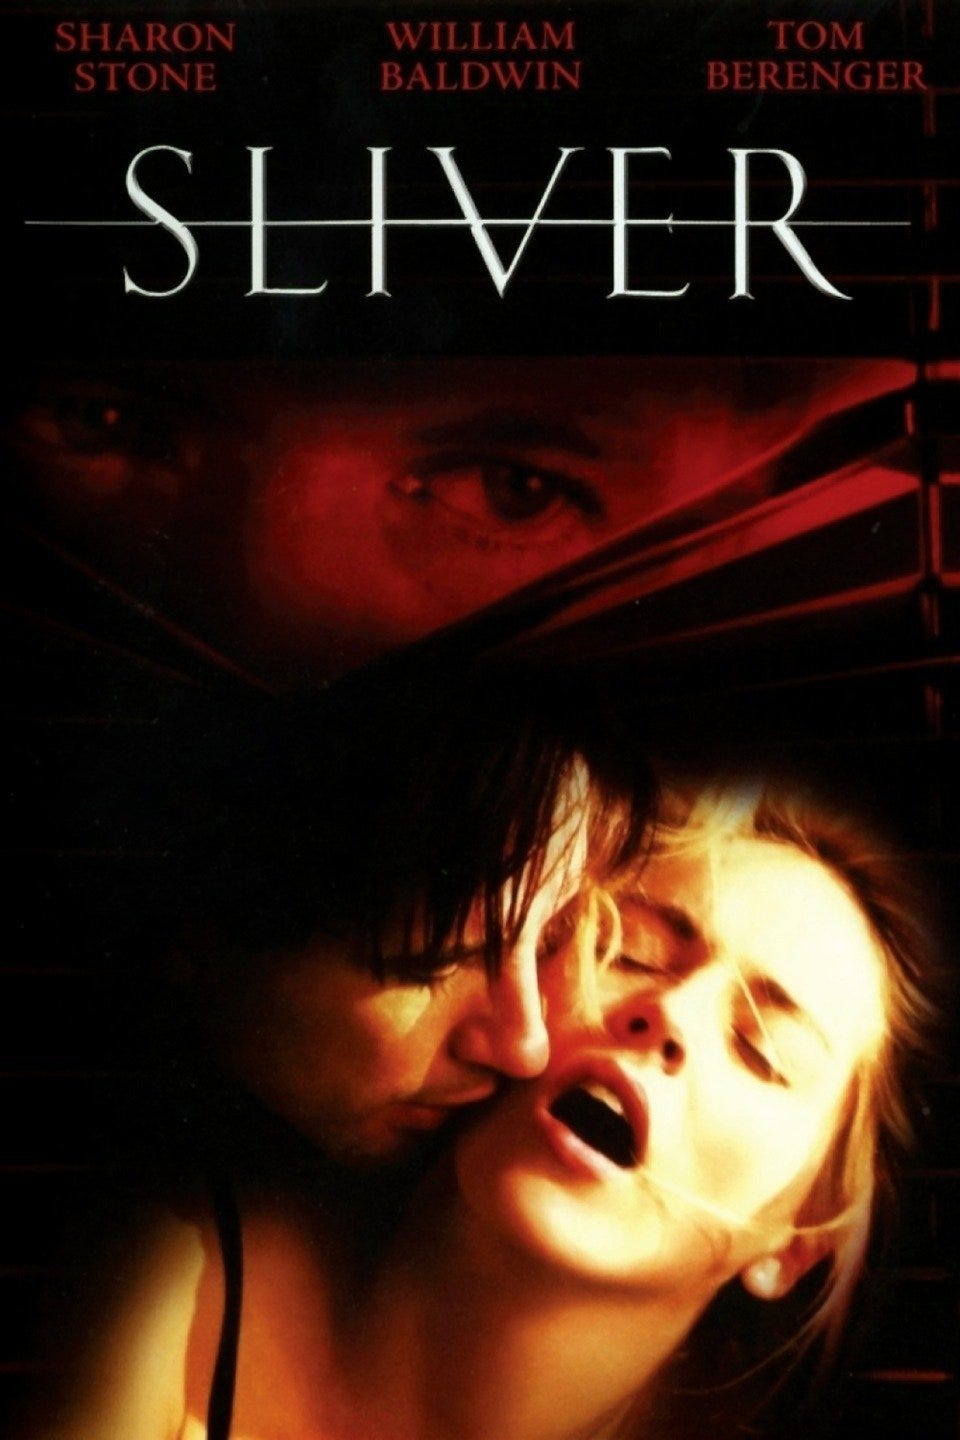 View To A Kill Sliver (1993) image photo